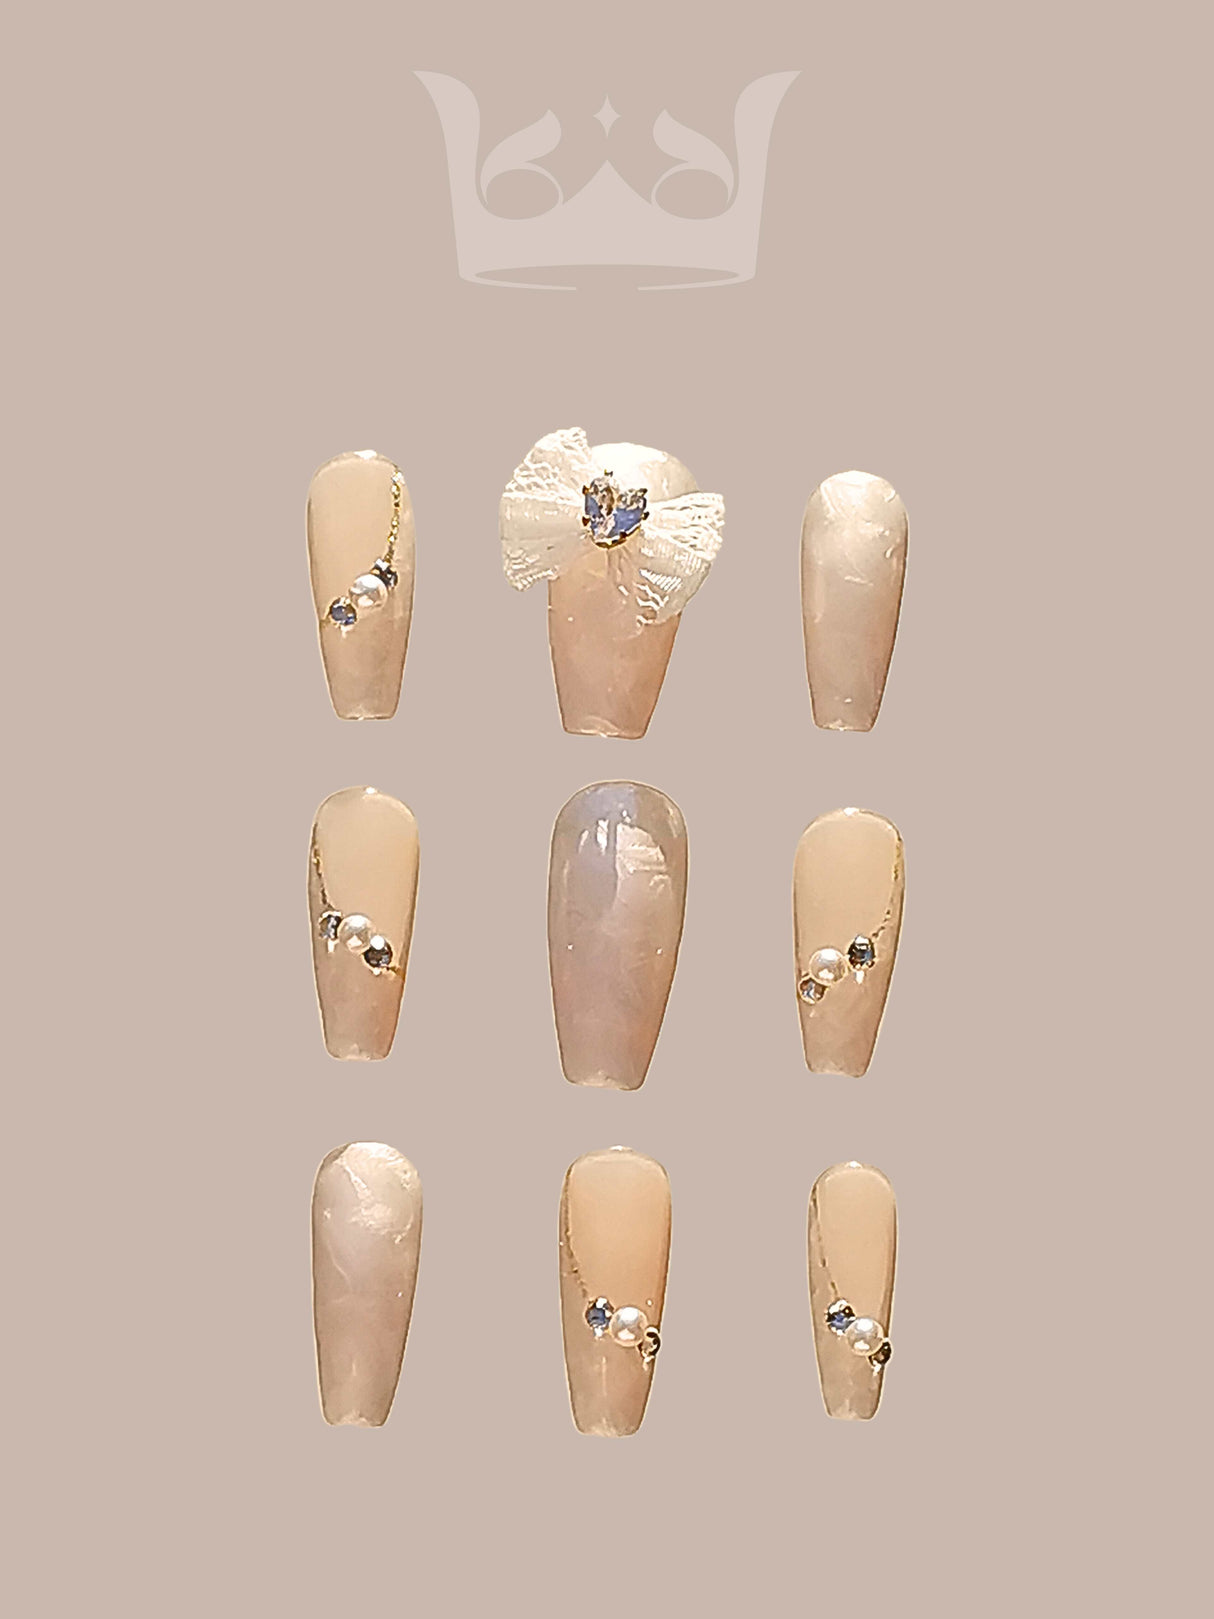 Sophisticated nails with nude base color, small shiny embellishments, flower-like design with jewel, and consistent rounded/oval shape for formal/luxurious occasions.